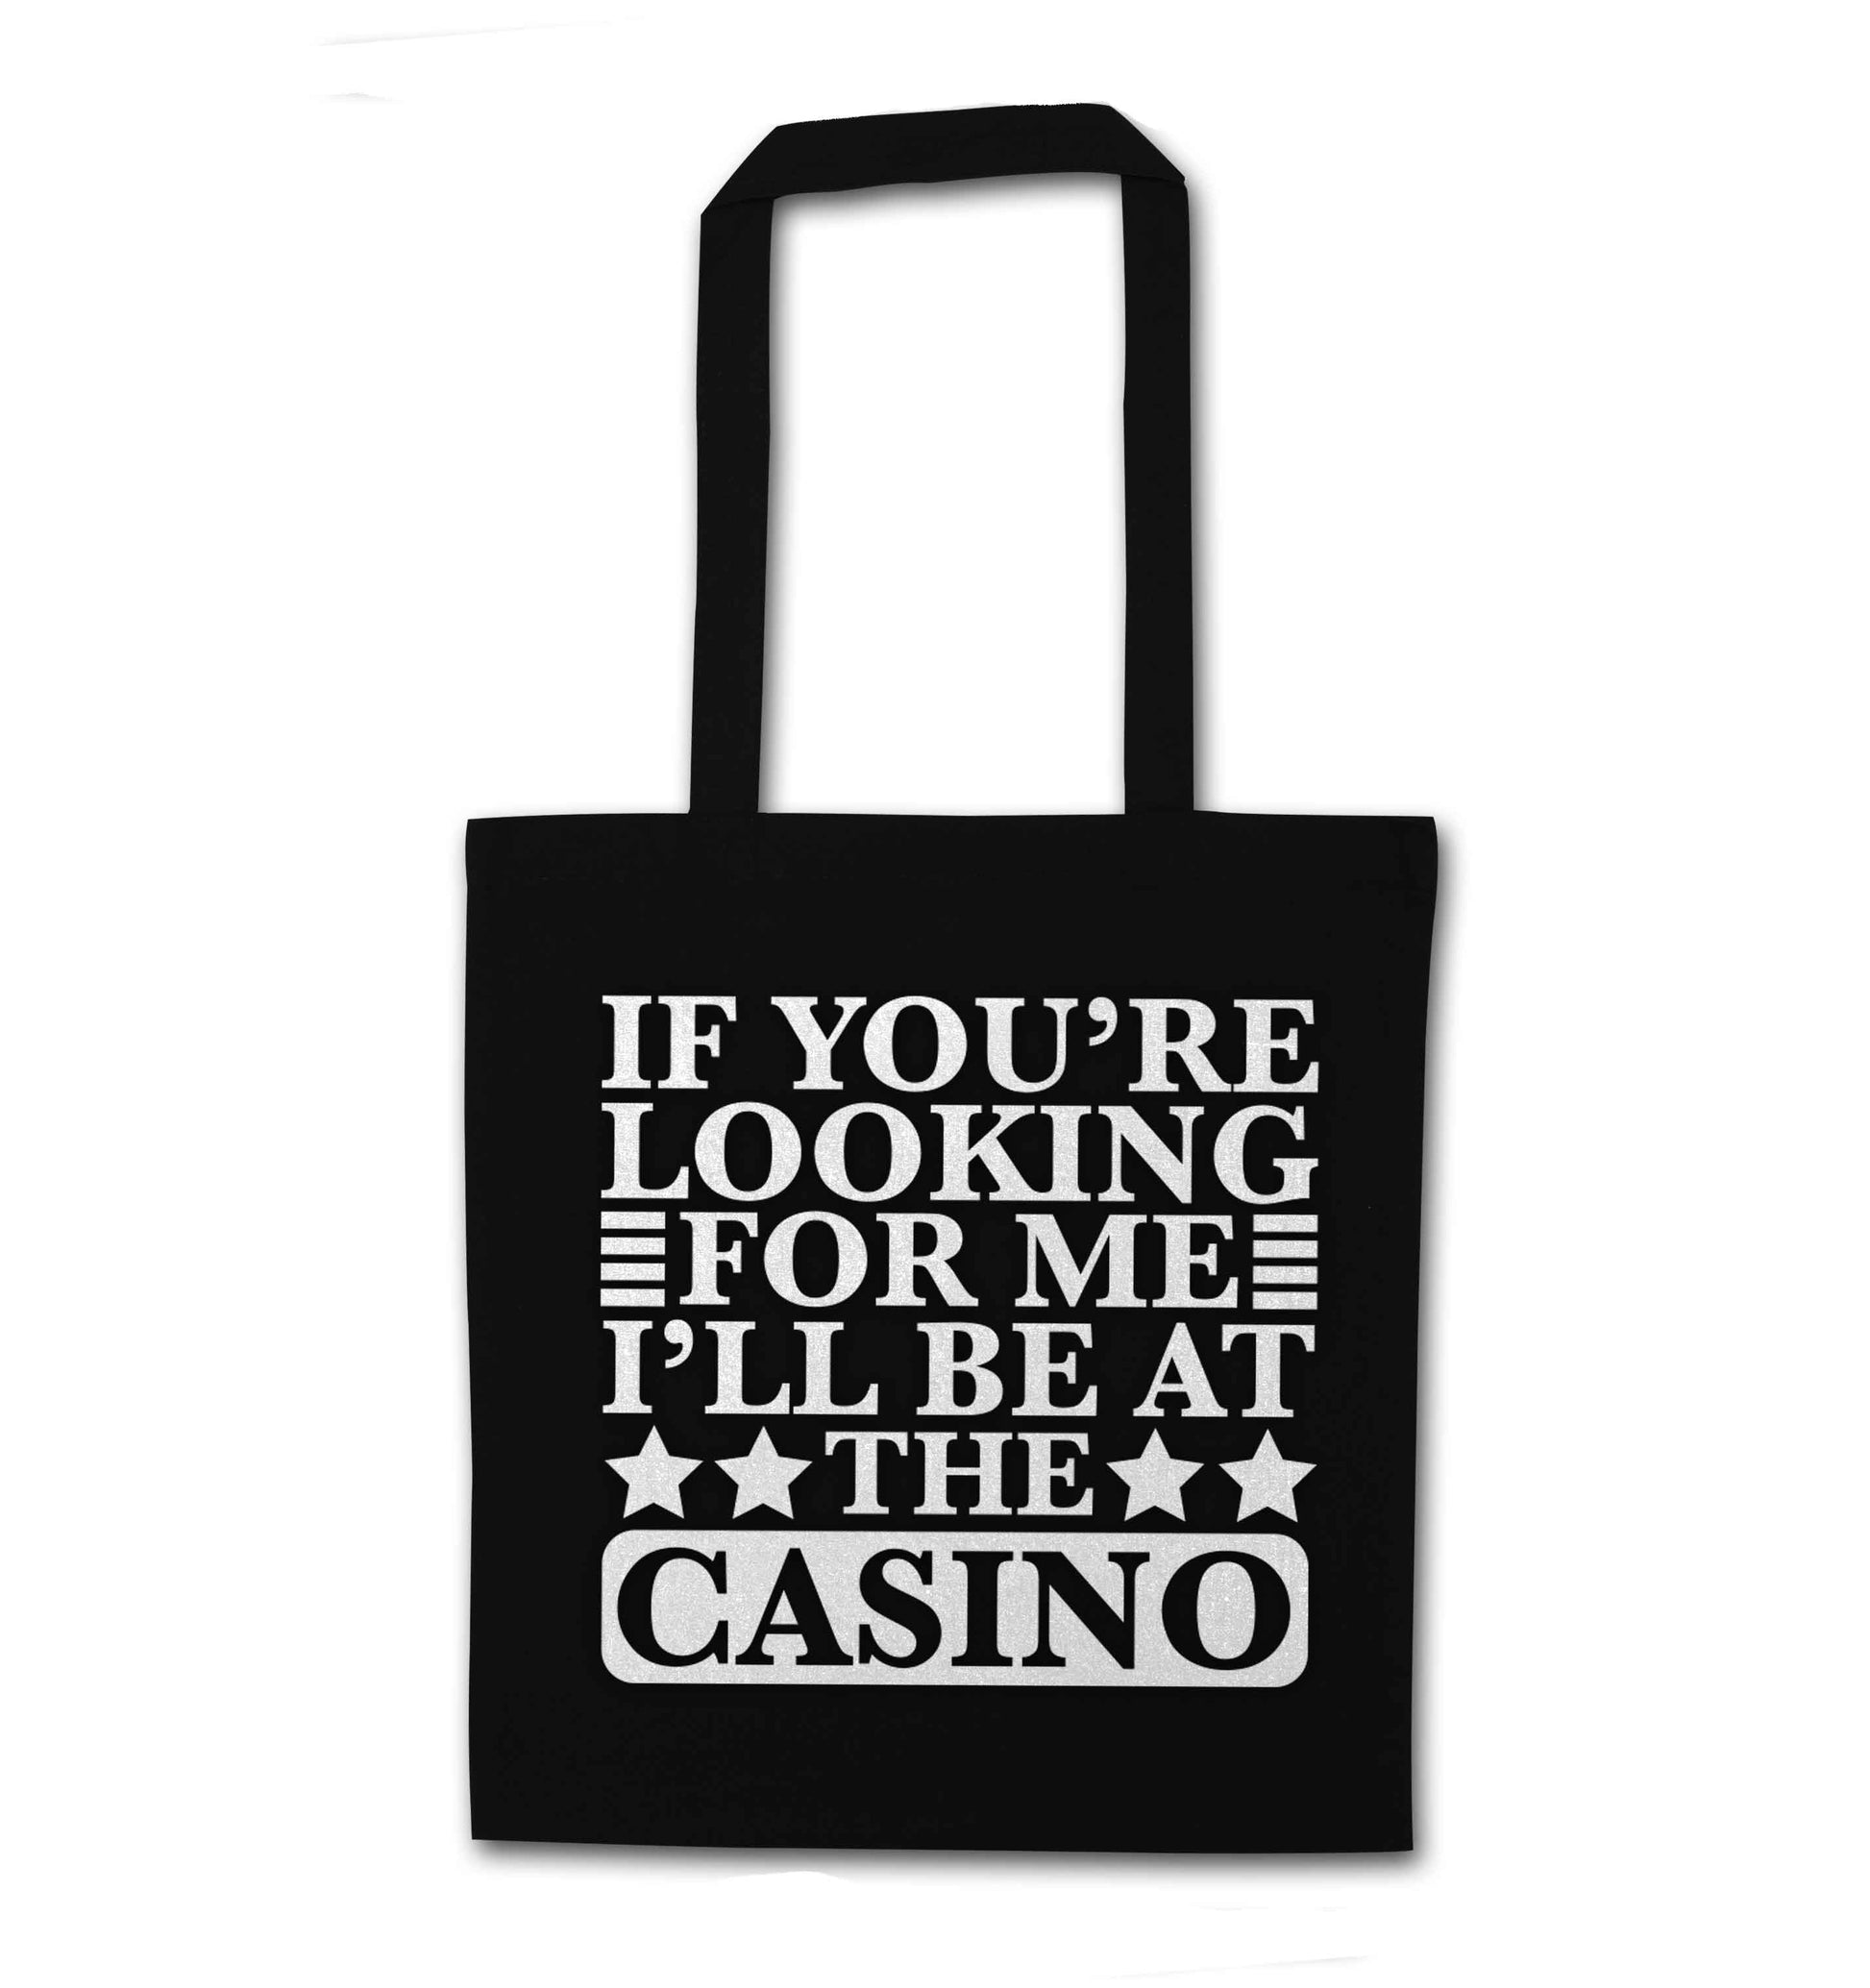 If you're looking for me I'll be at the casino black tote bag